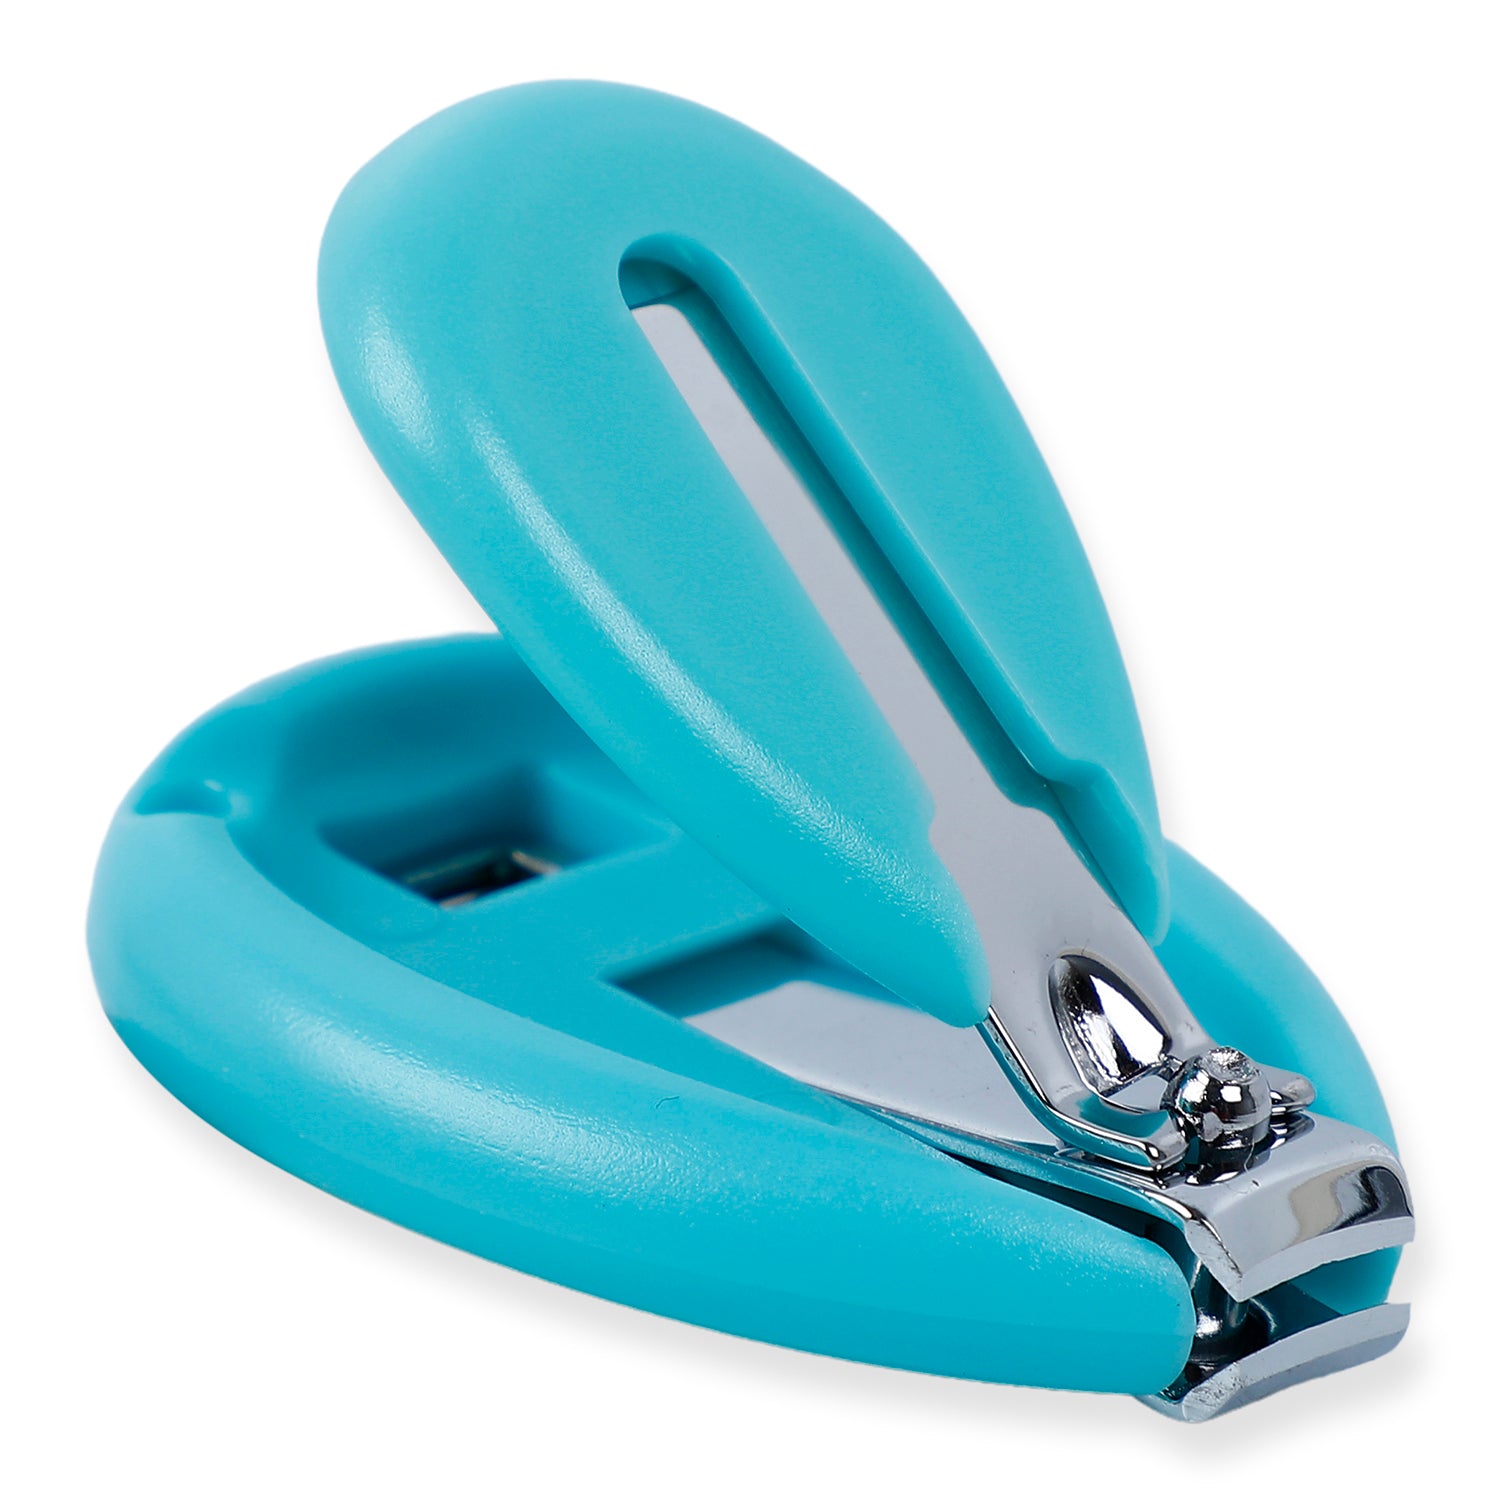 Baby Moo Quacking Ducky Gentle Manicure & Pedicure Infant Toddler Nail Clipper Set - Turquoise